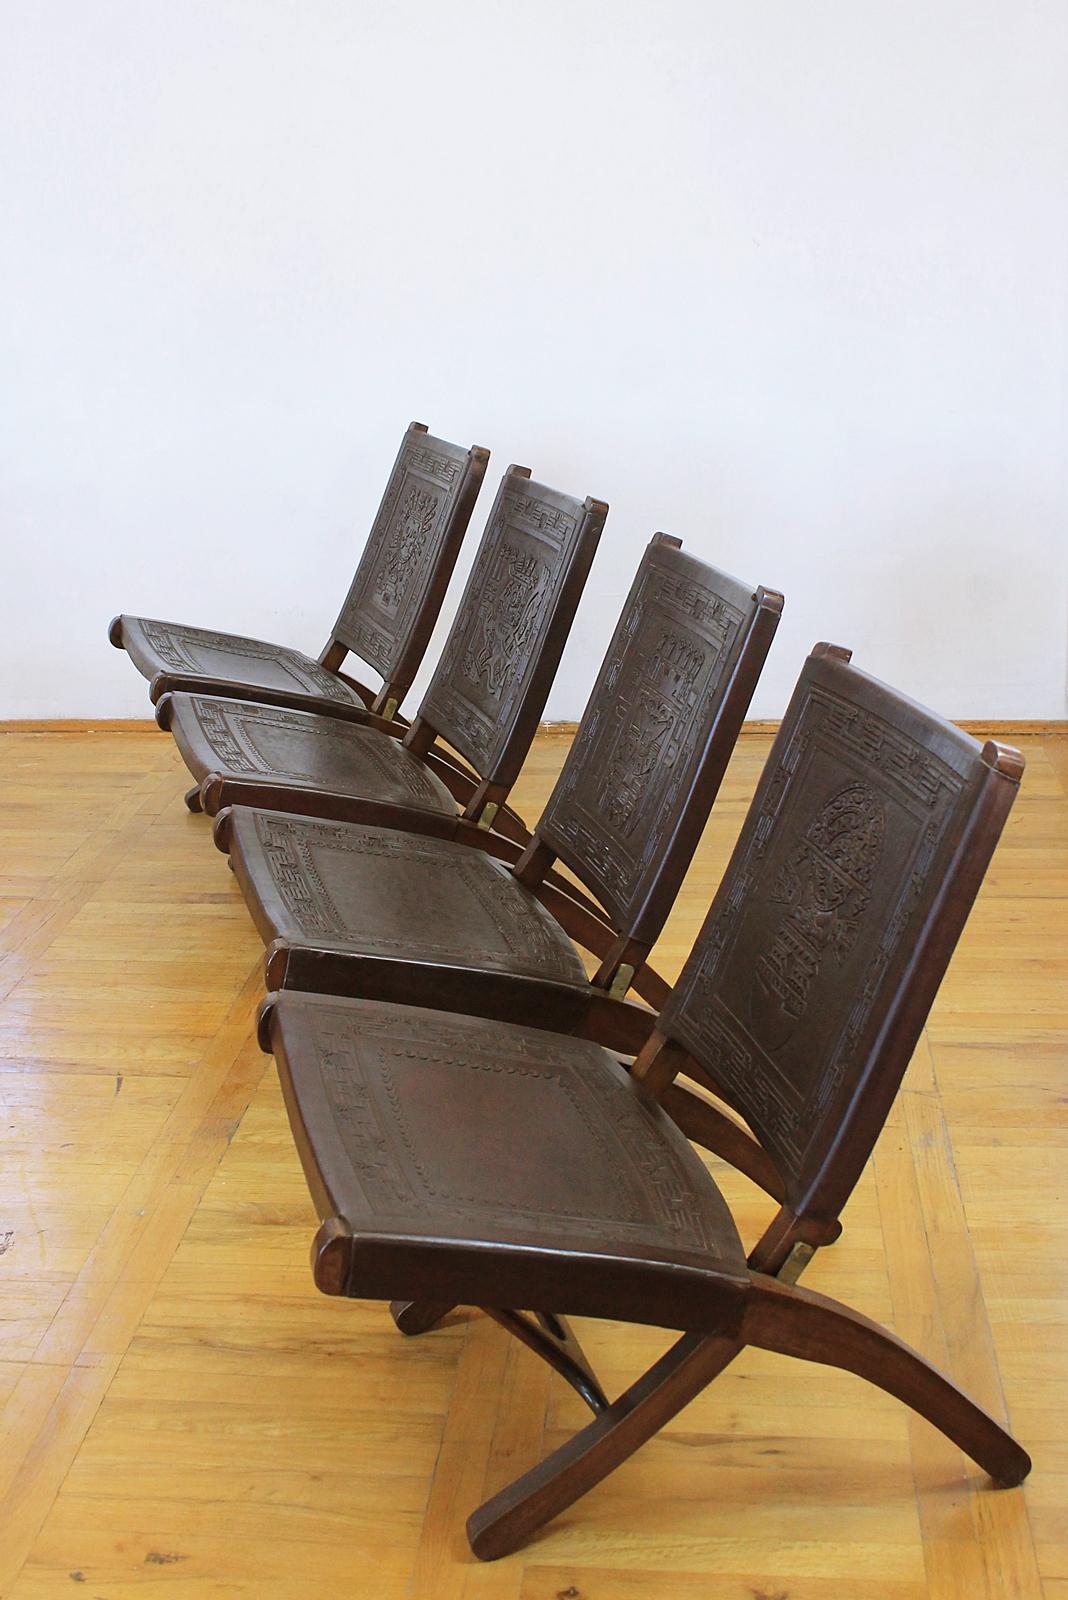 4 Peruvian leather chairs having seat and each has a different Peruvian figure hand tooled into leather backrest. All on solid wood frame with brass folding mechanism.
 
Condition: Wear consistent with age and use.

Priced per chair.


 